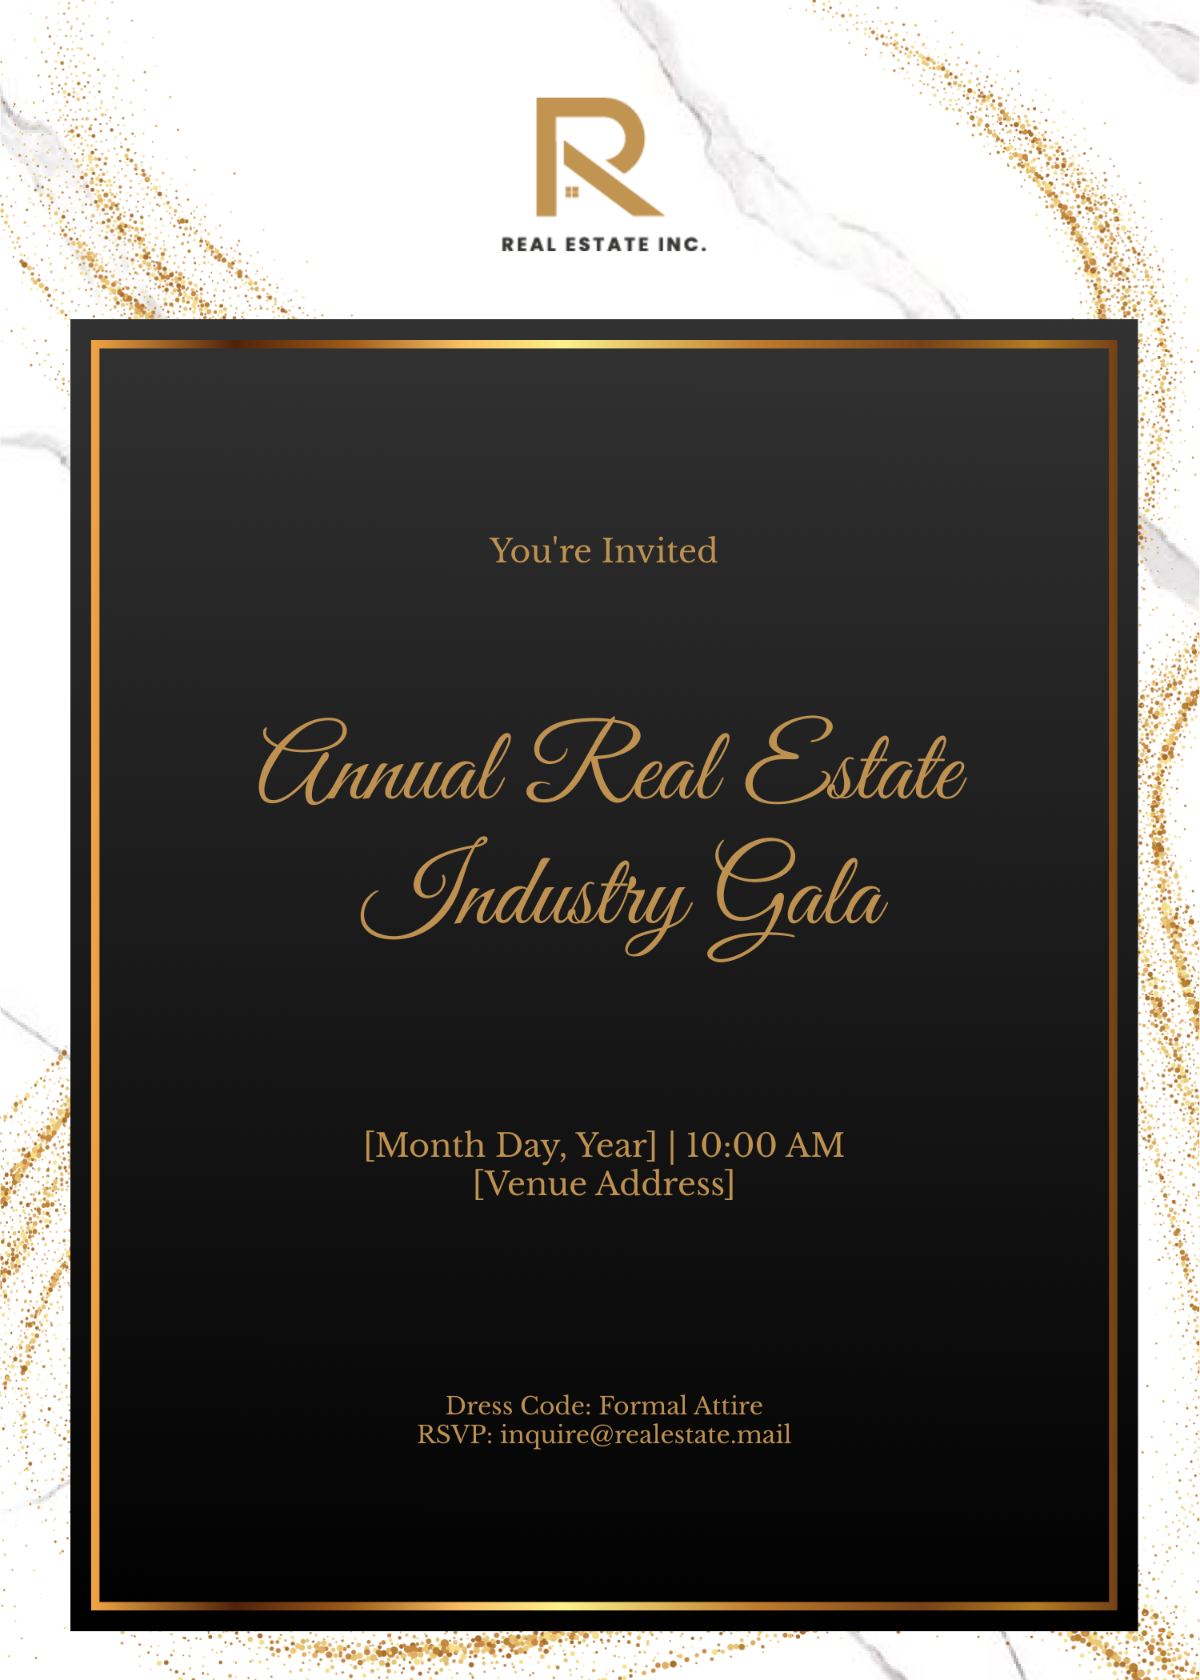 Annual Real Estate Industry Gala Invitation Card Template